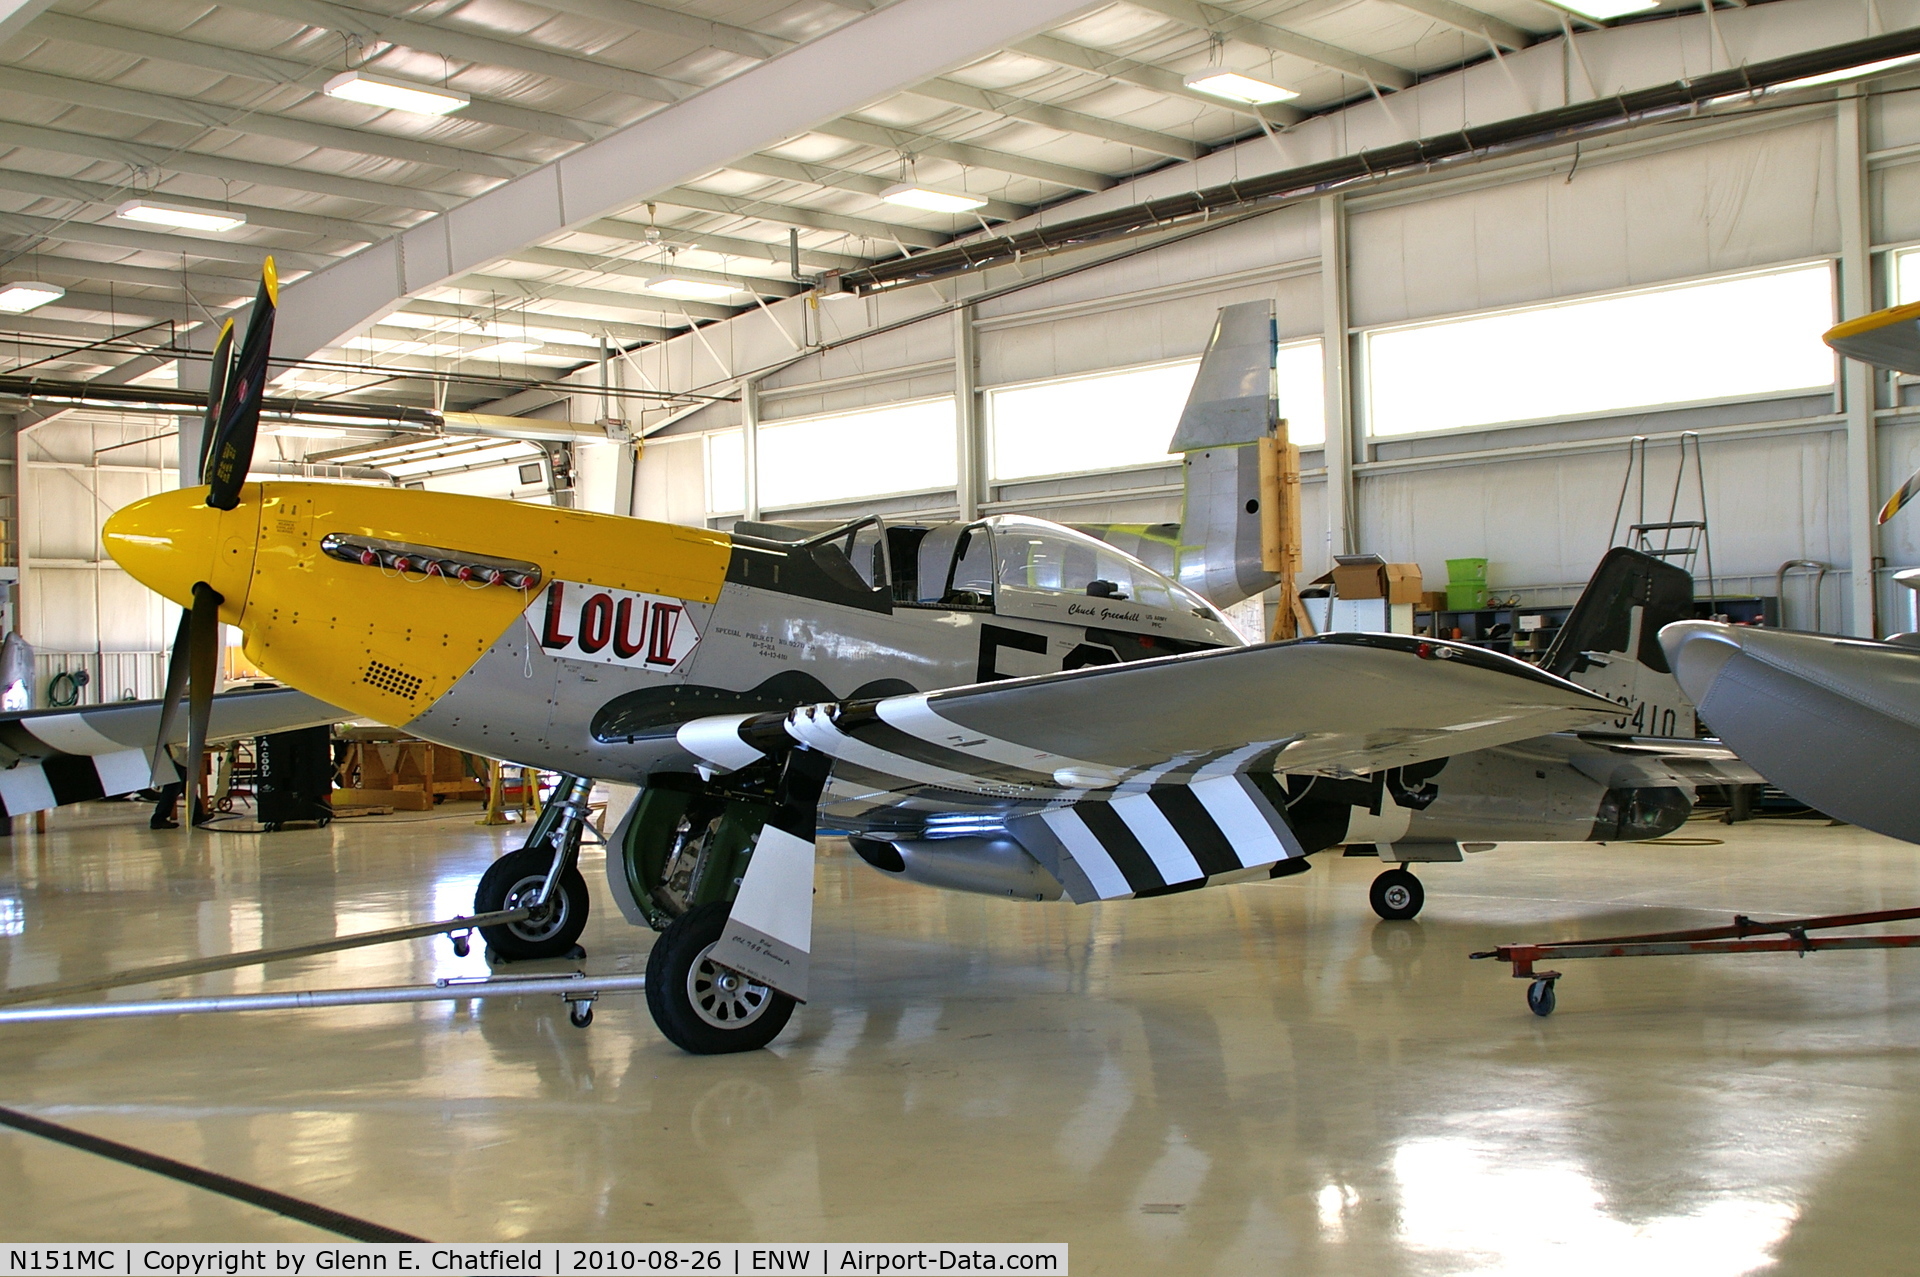 N151MC, 1968 North American F-51D Mustang Mustang C/N AF6722581, Parked in the hangar with another P-51, JRFs, J4F